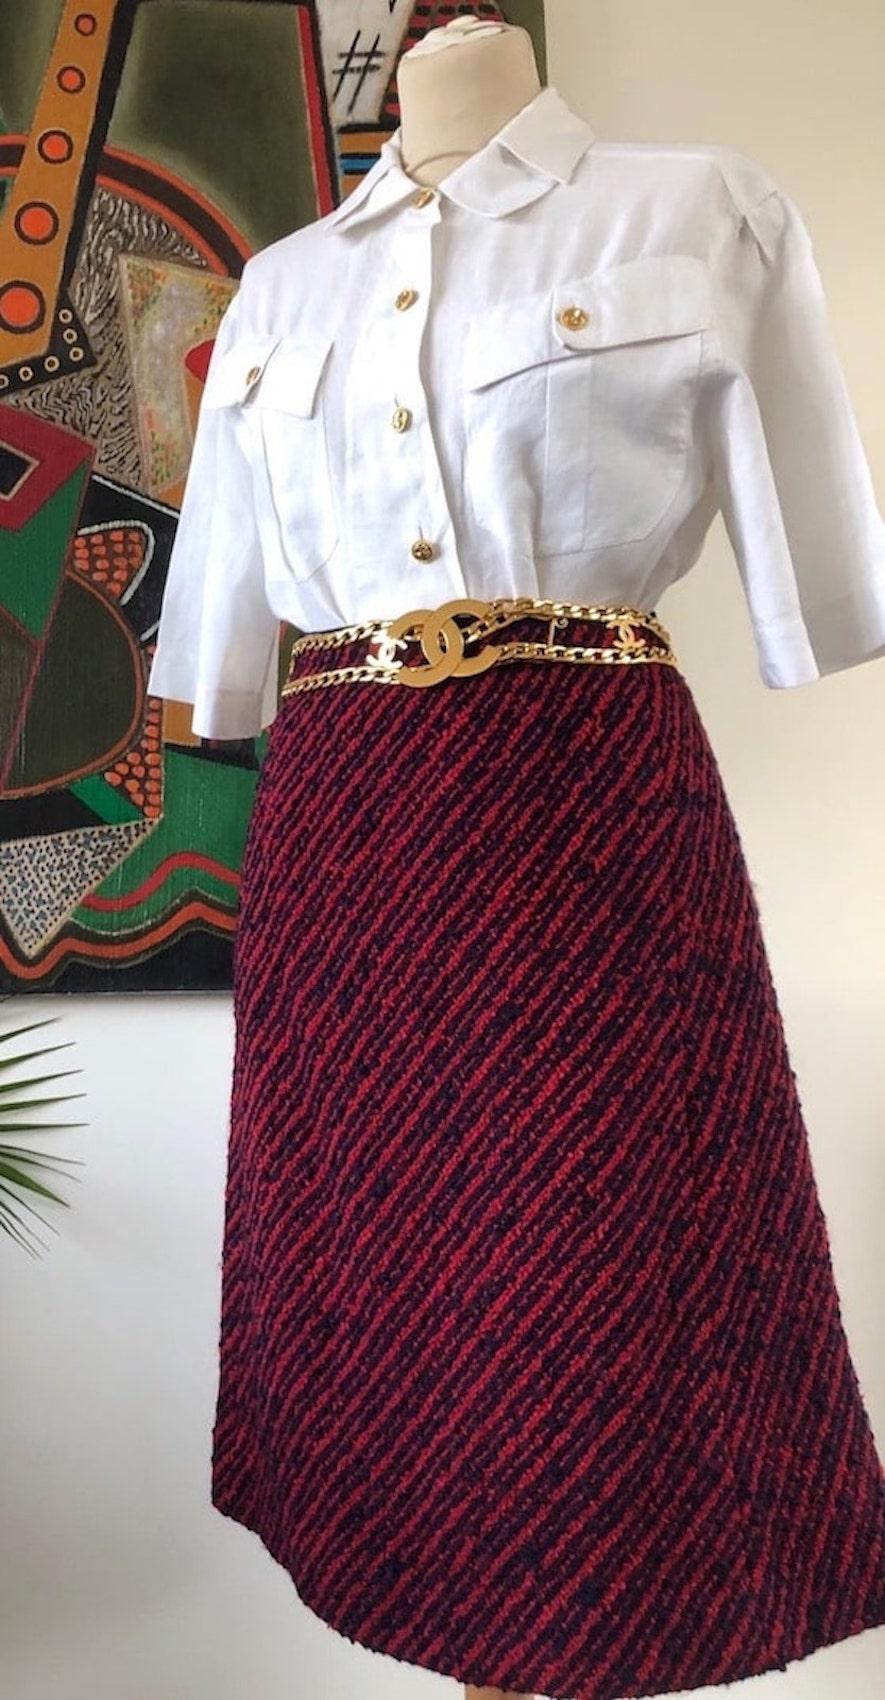 CHANEL Couture Tweed Pencil Skirt Vintage Red Midnight blue
A classic Coco Chanel Tweed vintage skirt featuring a high waist, back hidden Eclair zip closure, a wonderful vintage piece. Can be worn like a classic look, like it is, long like Coco